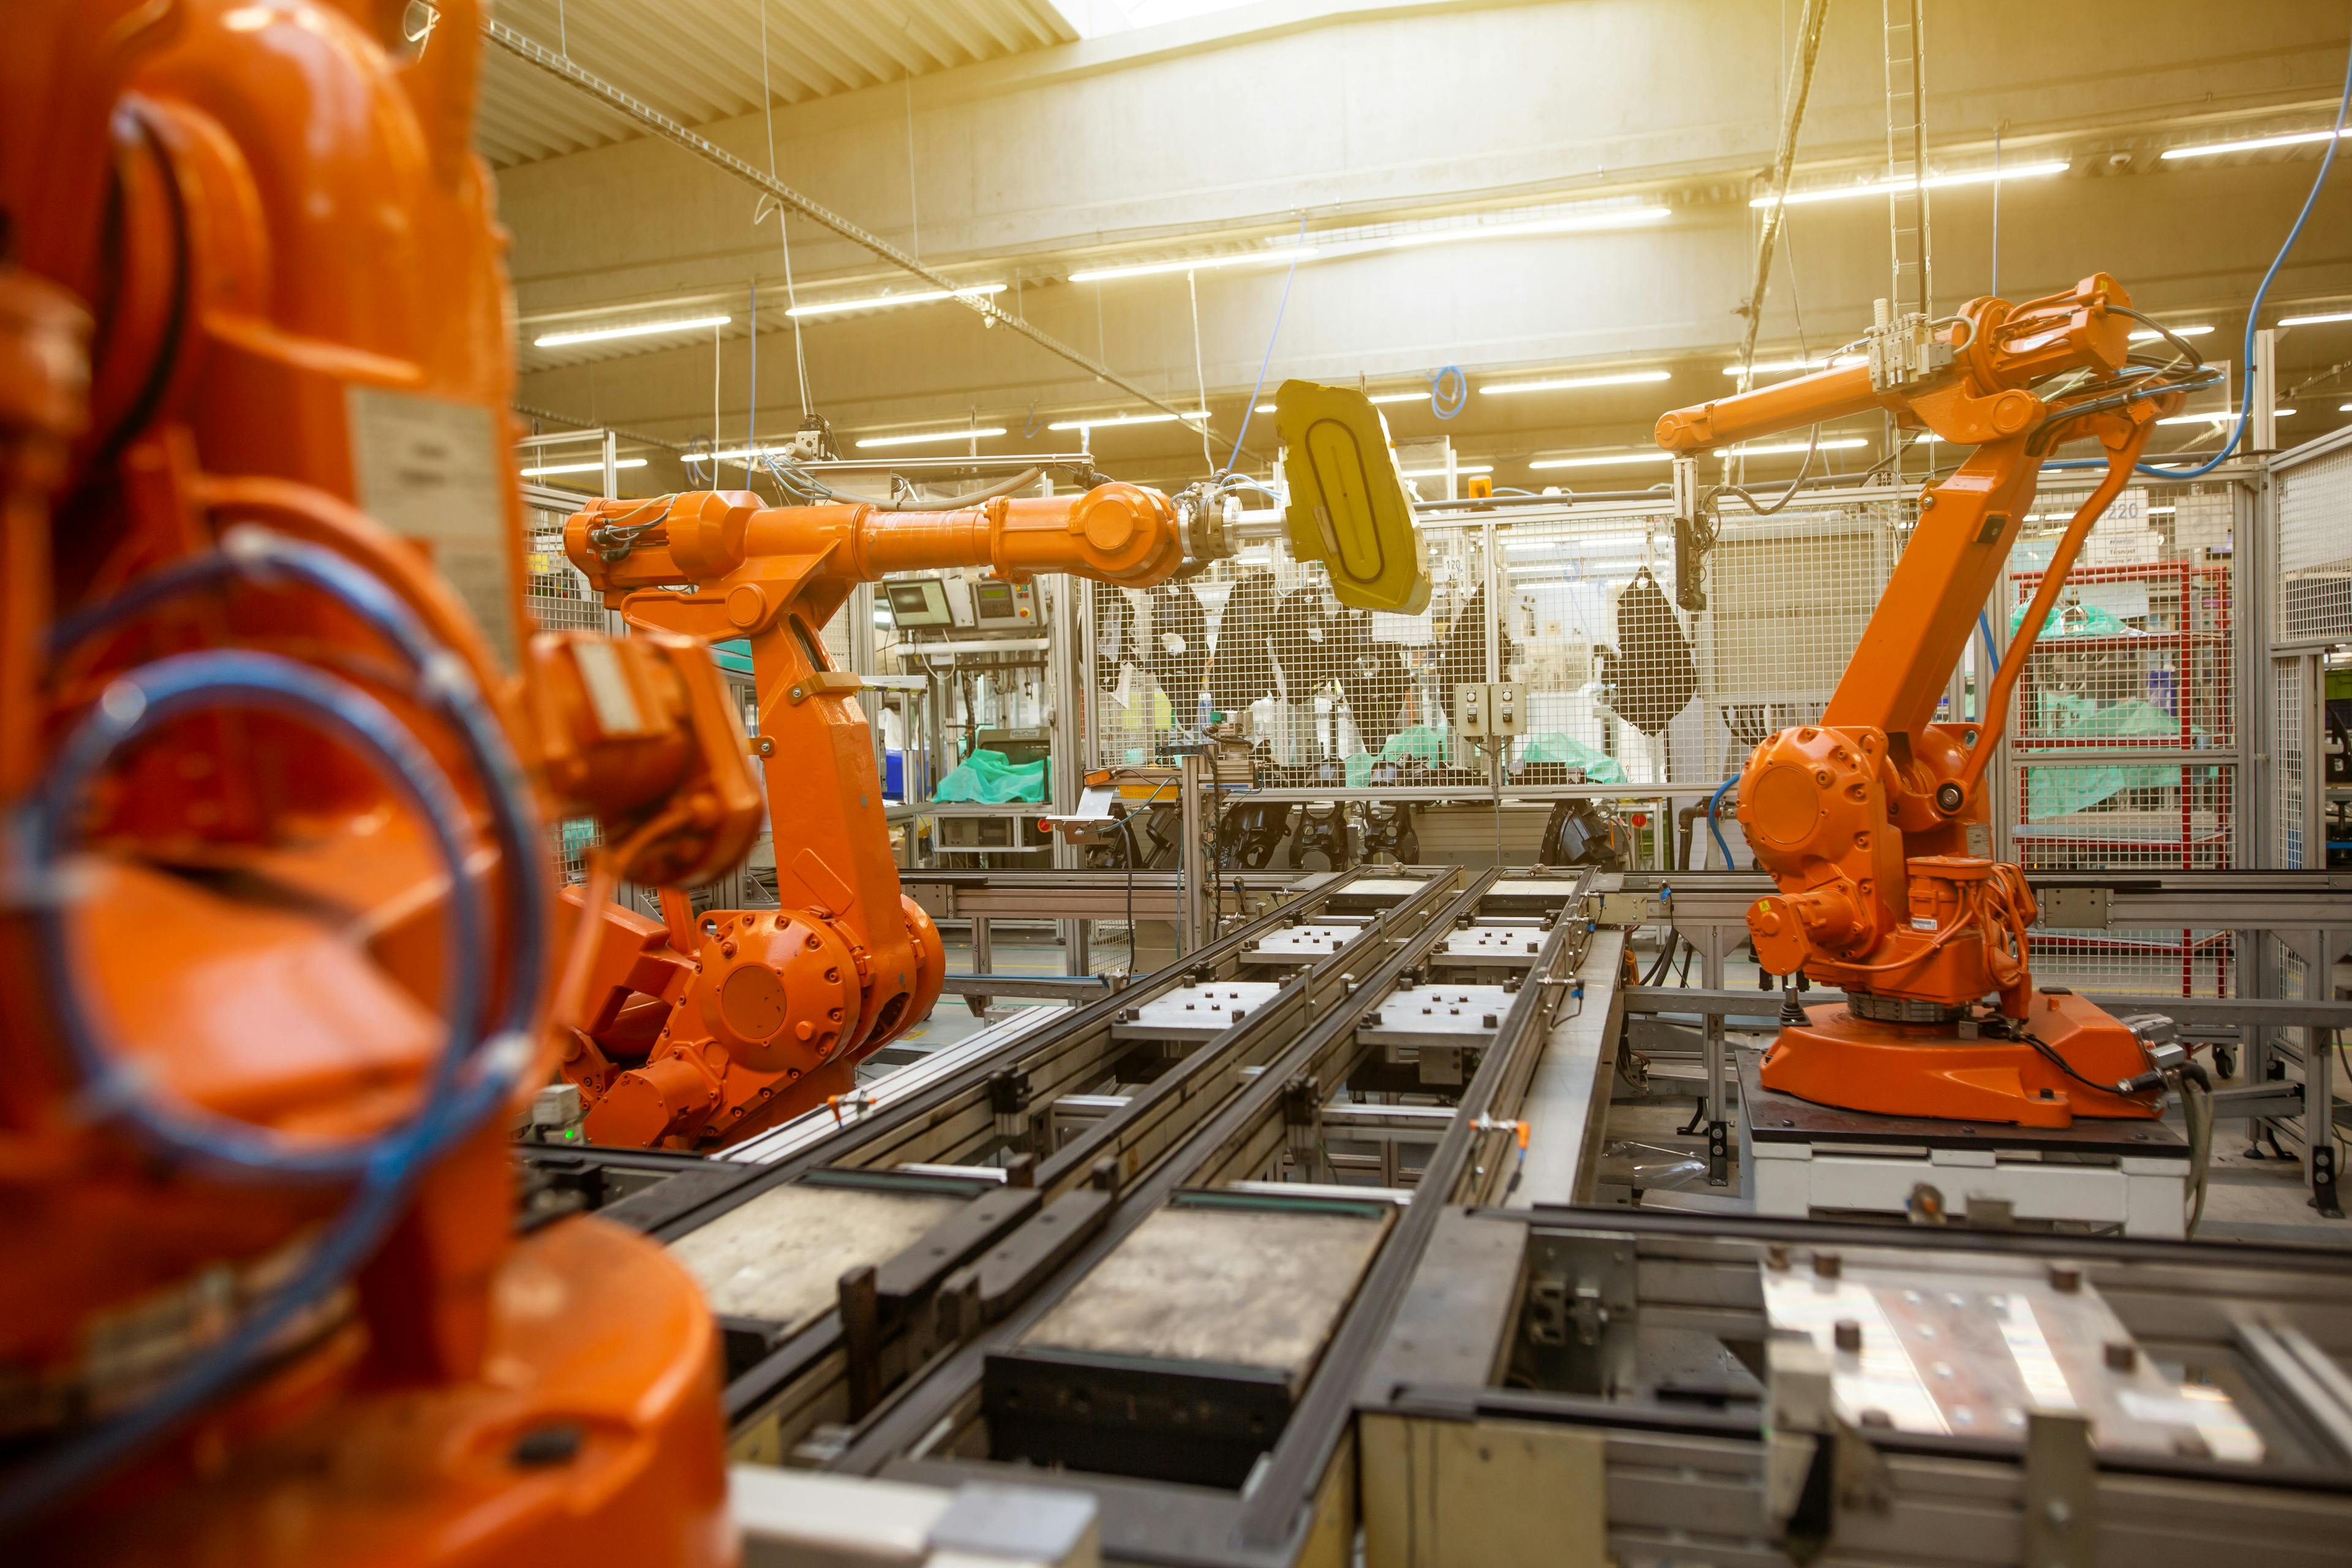 Automated robots on an assembly line at an industrial facility